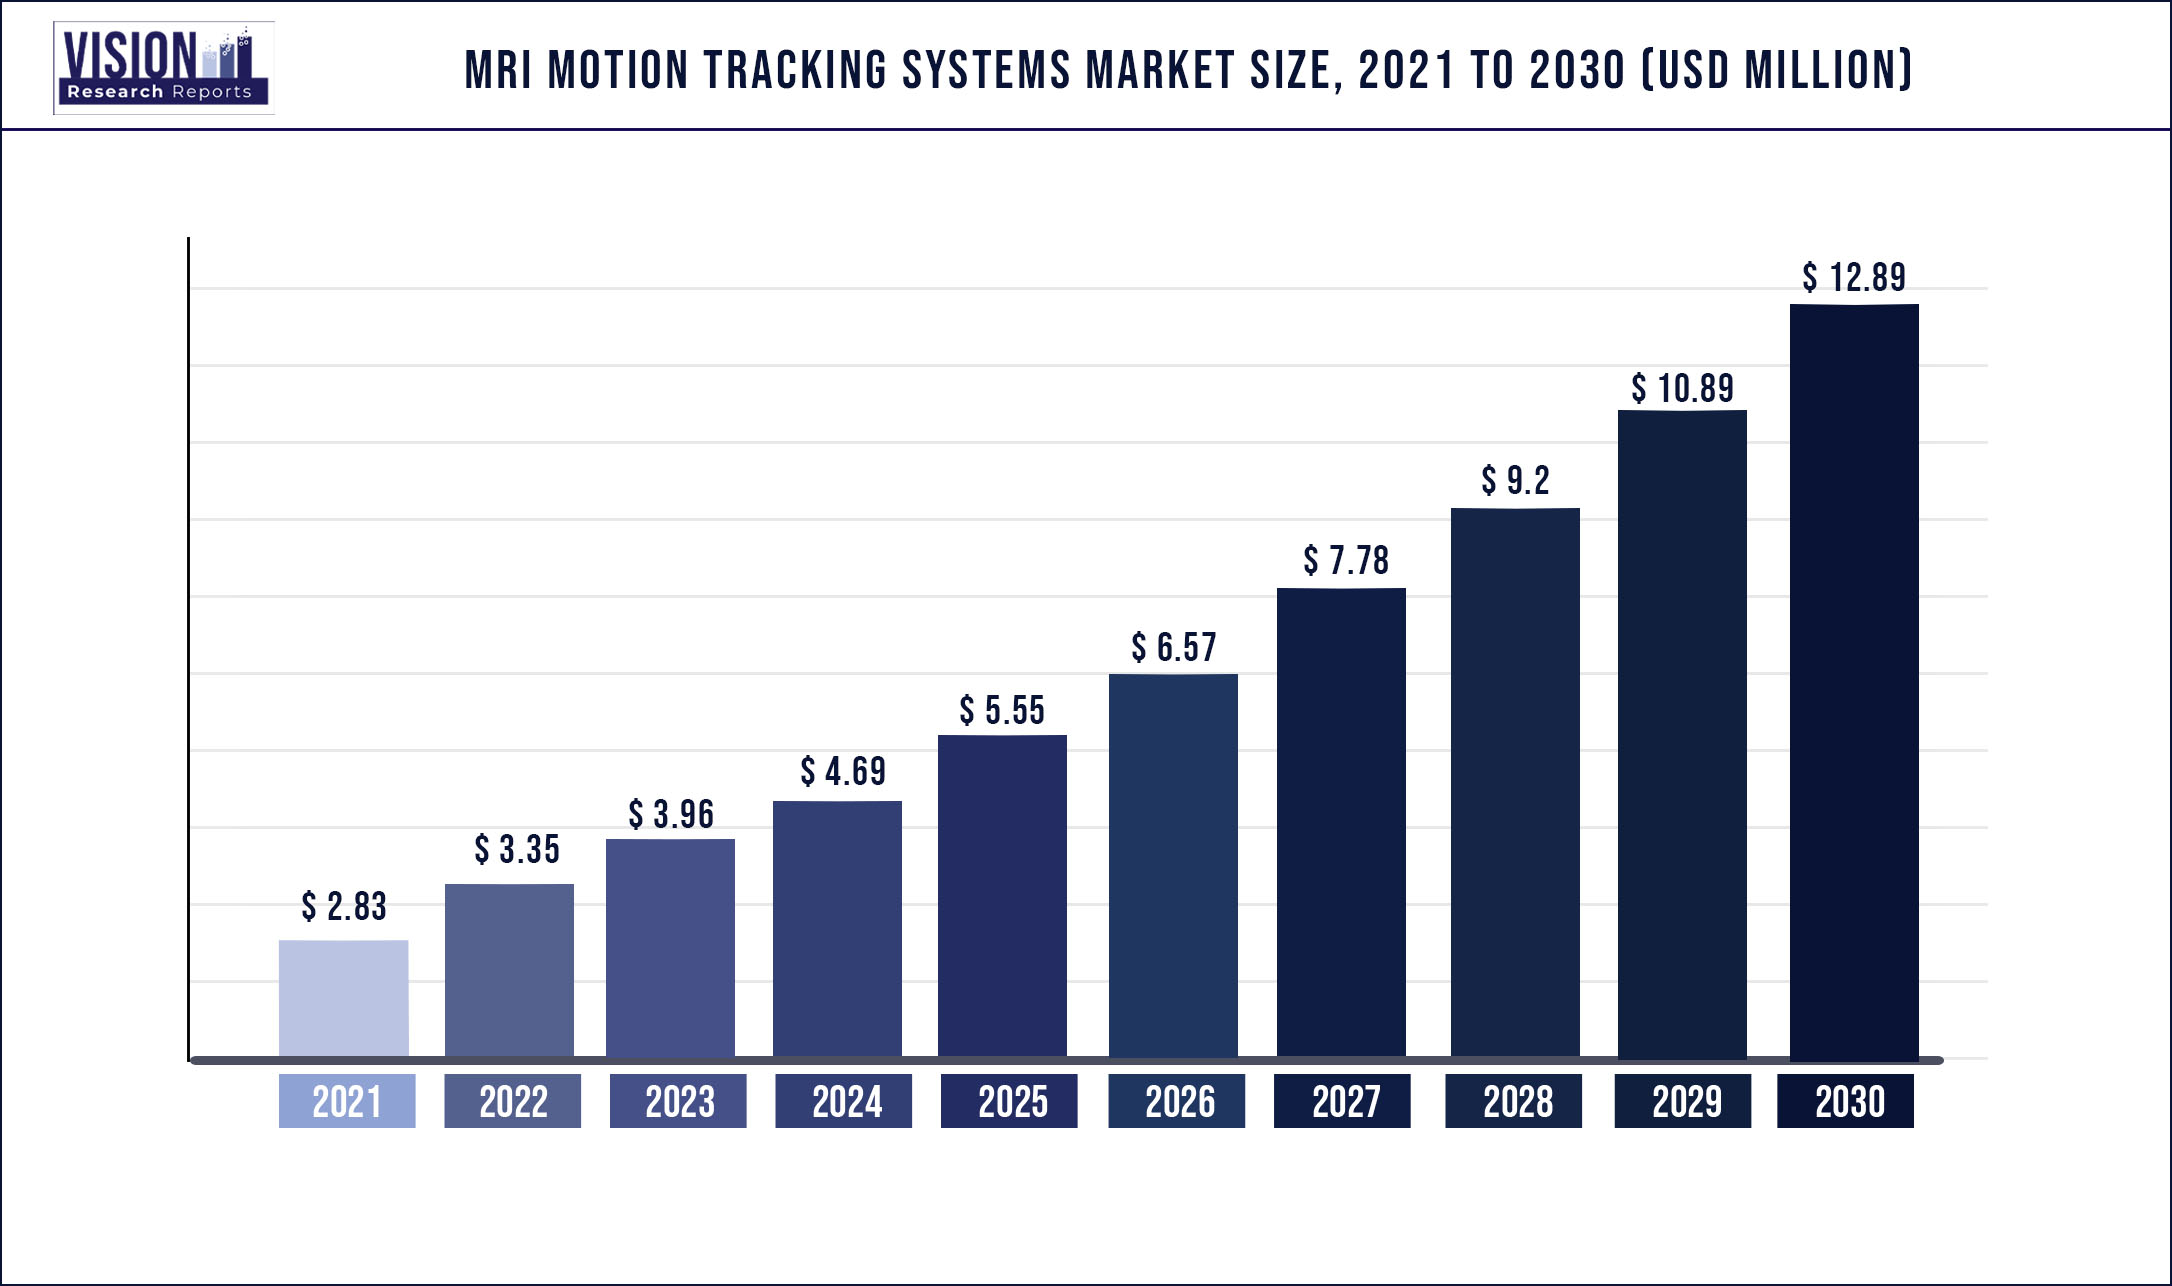 MRI Motion Tracking Systems Market Size 2021 to 2030